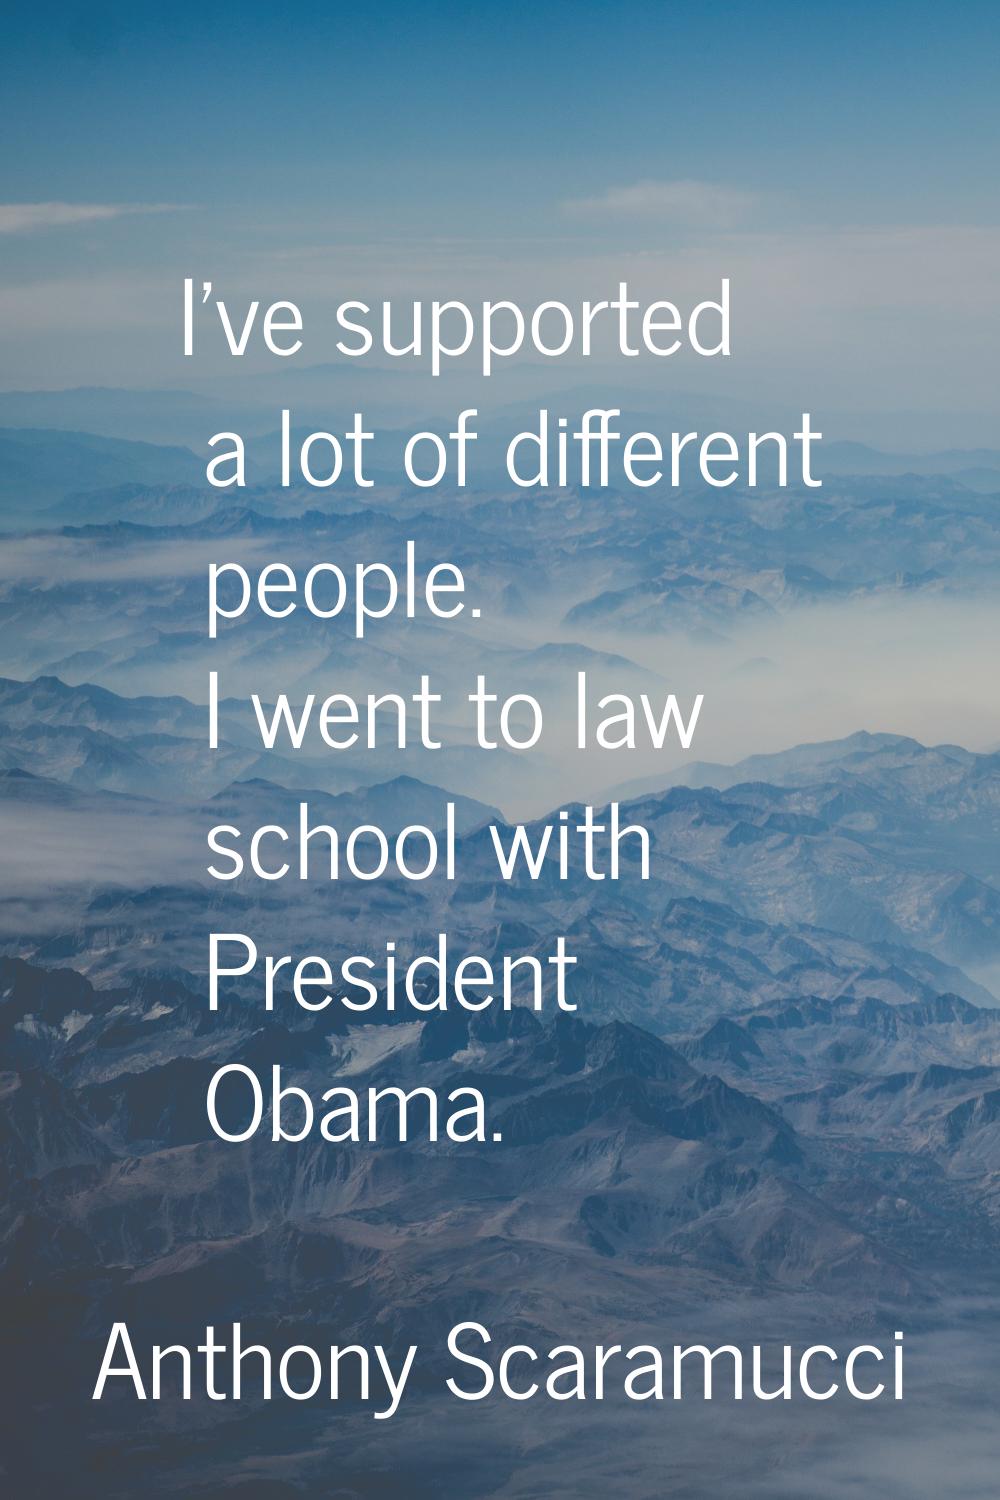 I've supported a lot of different people. I went to law school with President Obama.